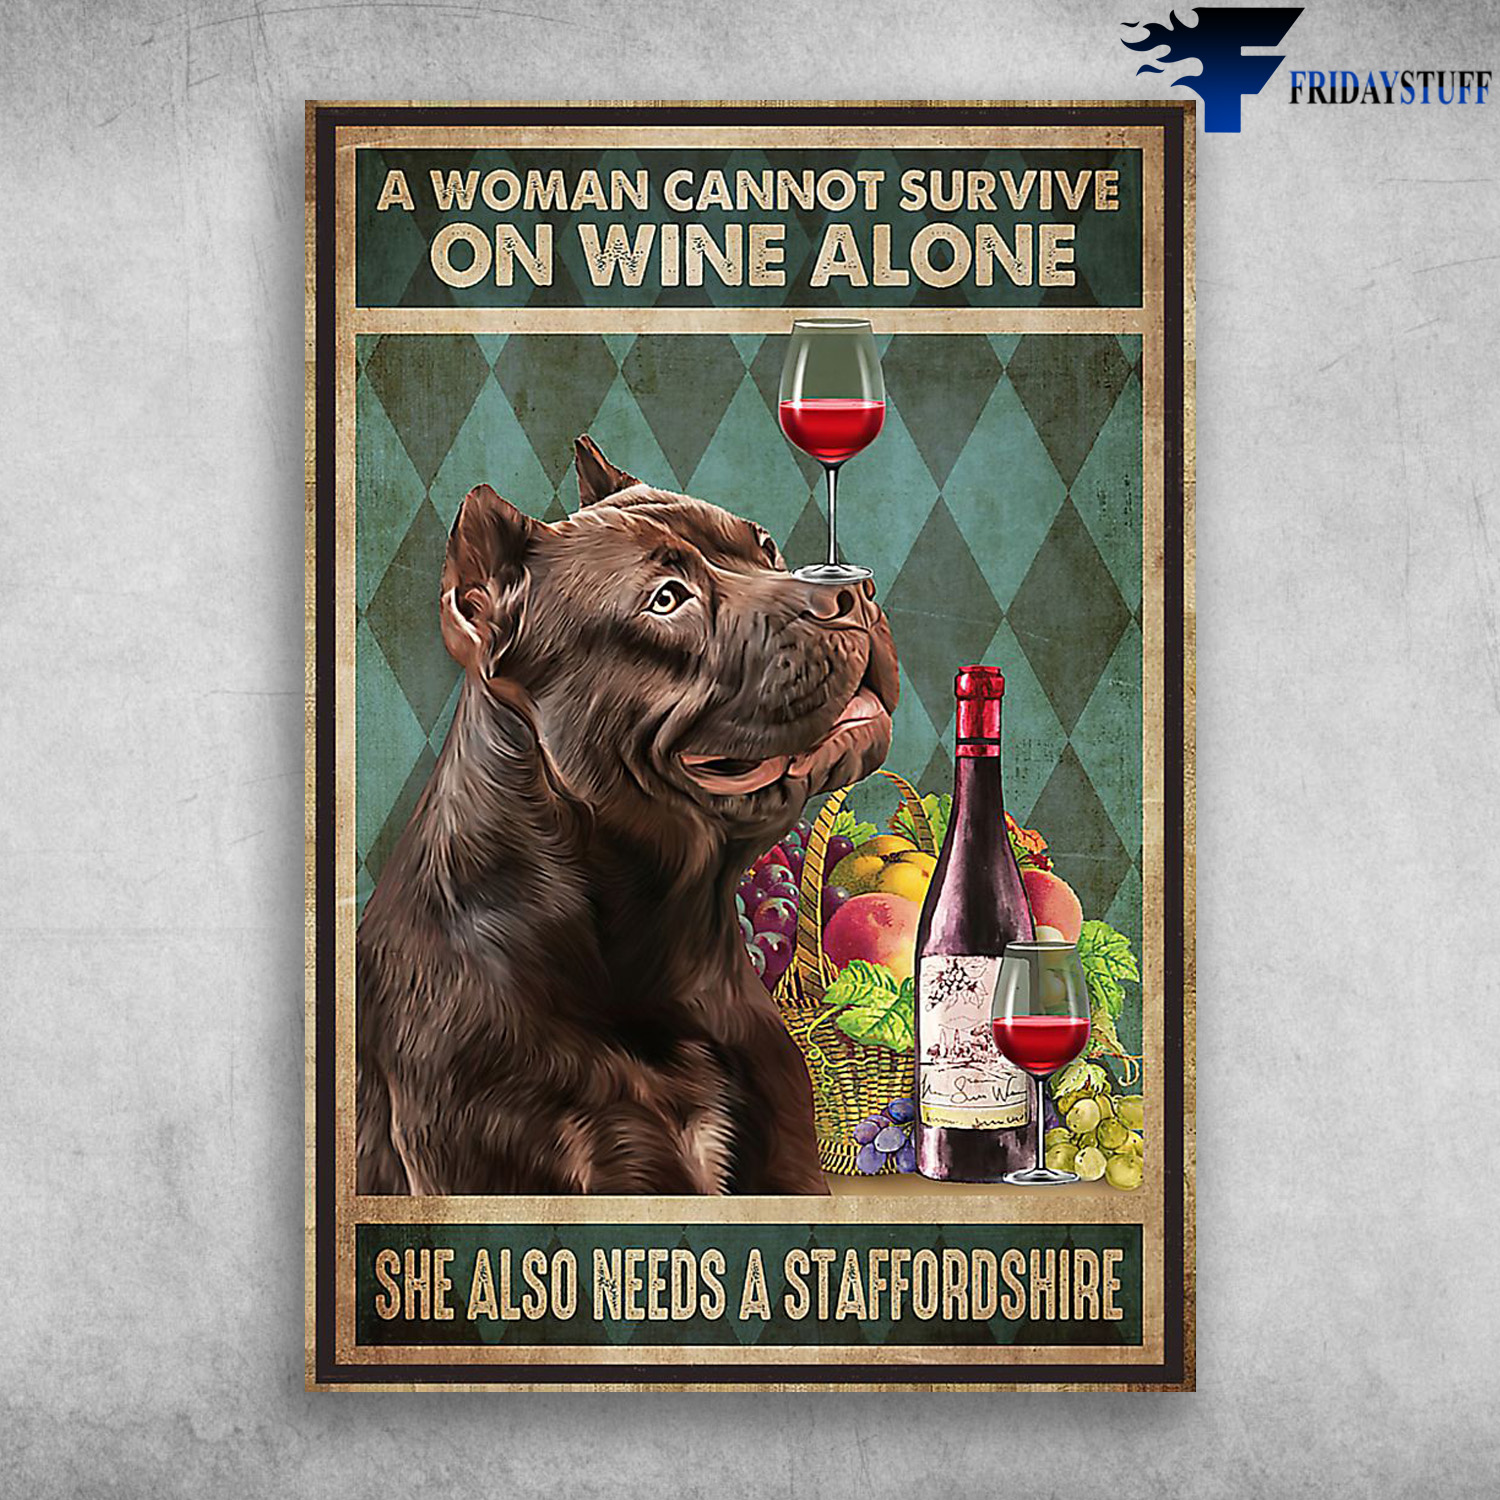 Staffordshire And Wine - A Woman Cannot Survive On Wine Alone, She Also Needs A Staffordshire